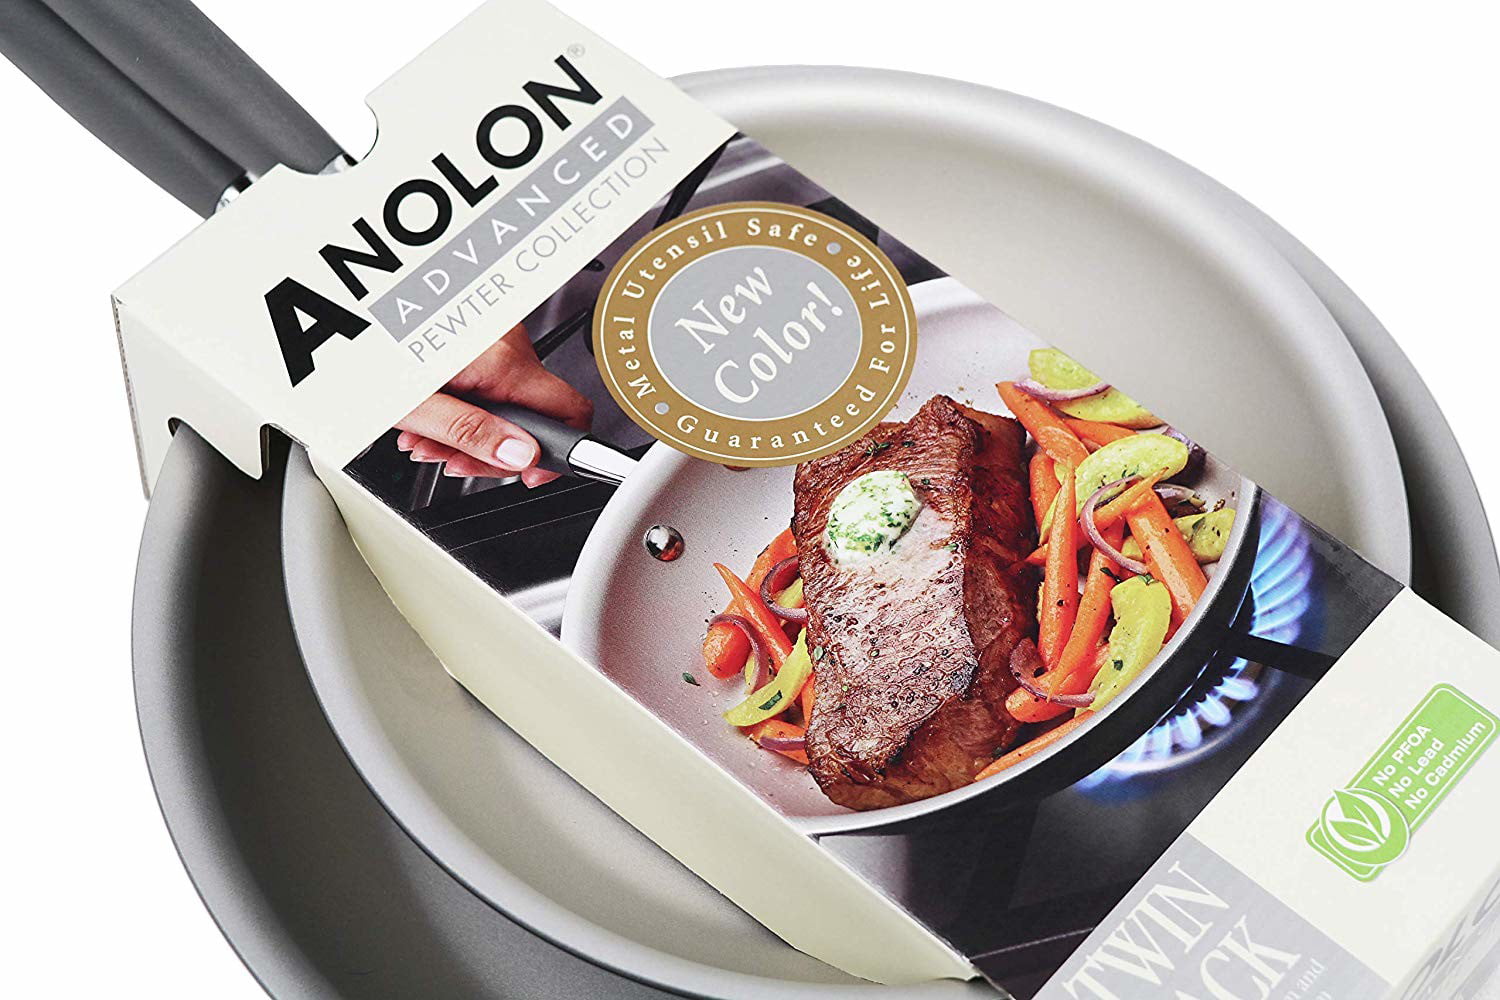 Anolon Advanced Hard-Anodized Nonstick French Skillet (10 & 12 